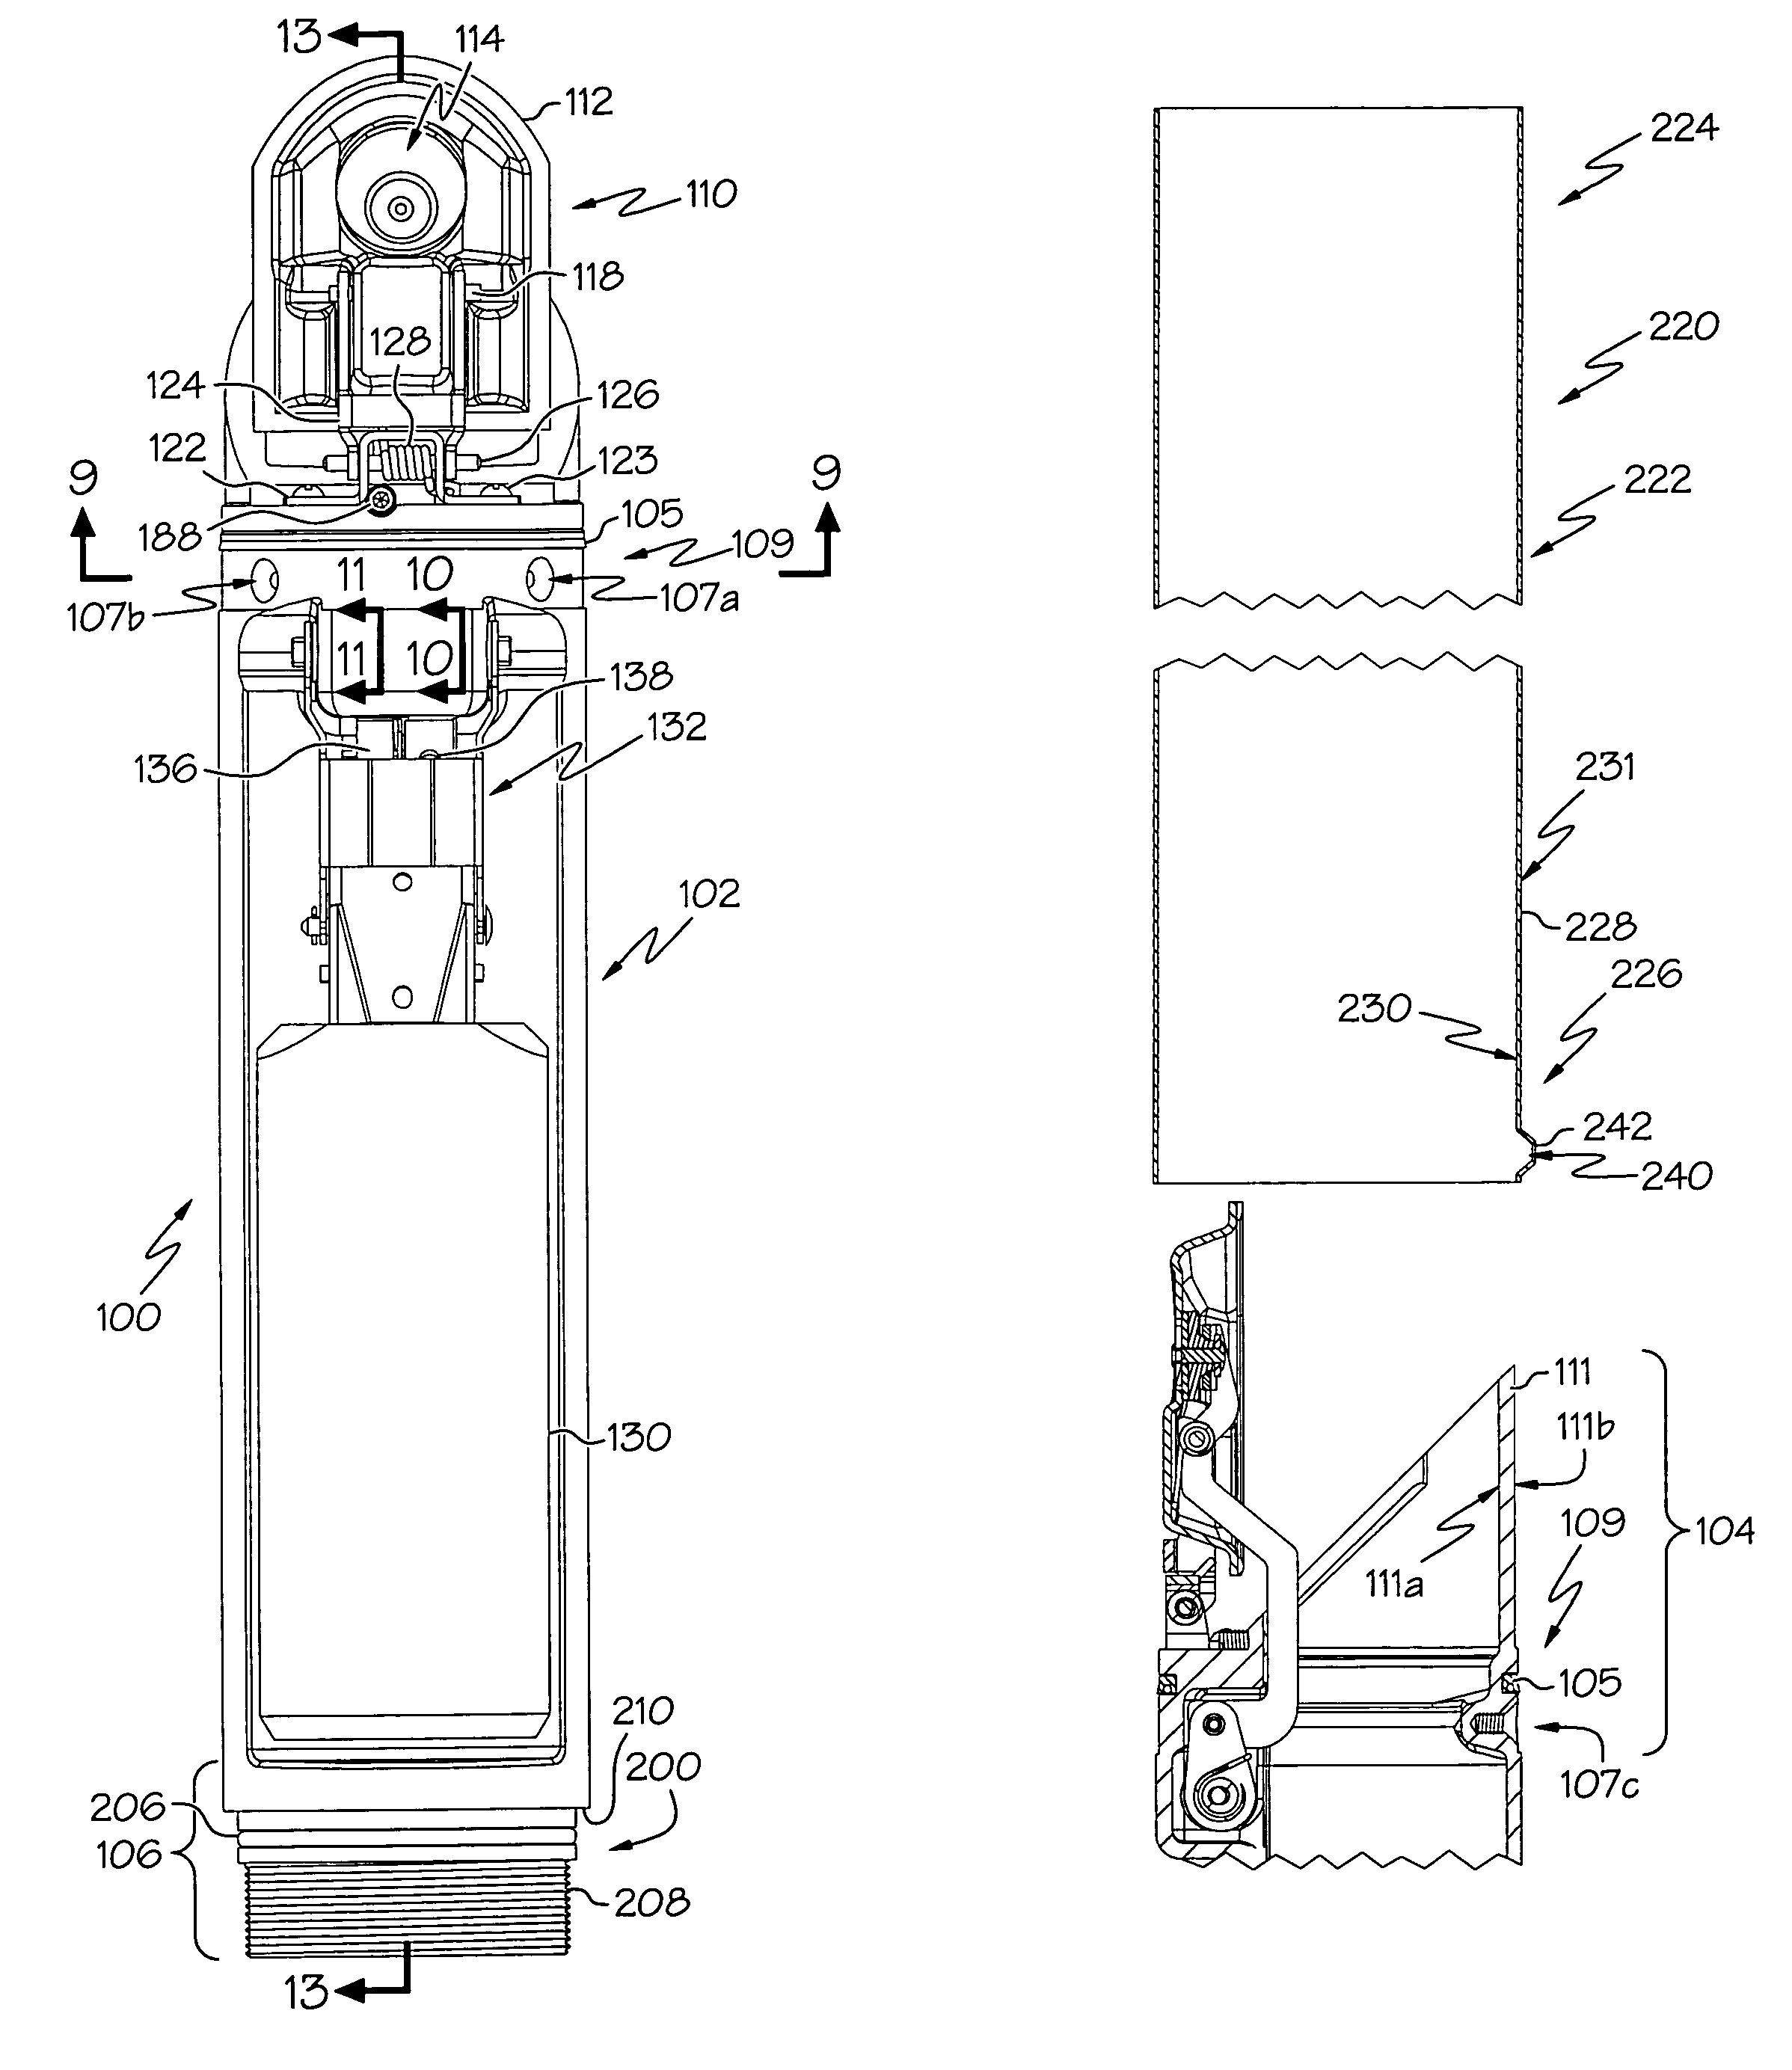 Drop tube segments adapted for use with a liquid reservoir and methods